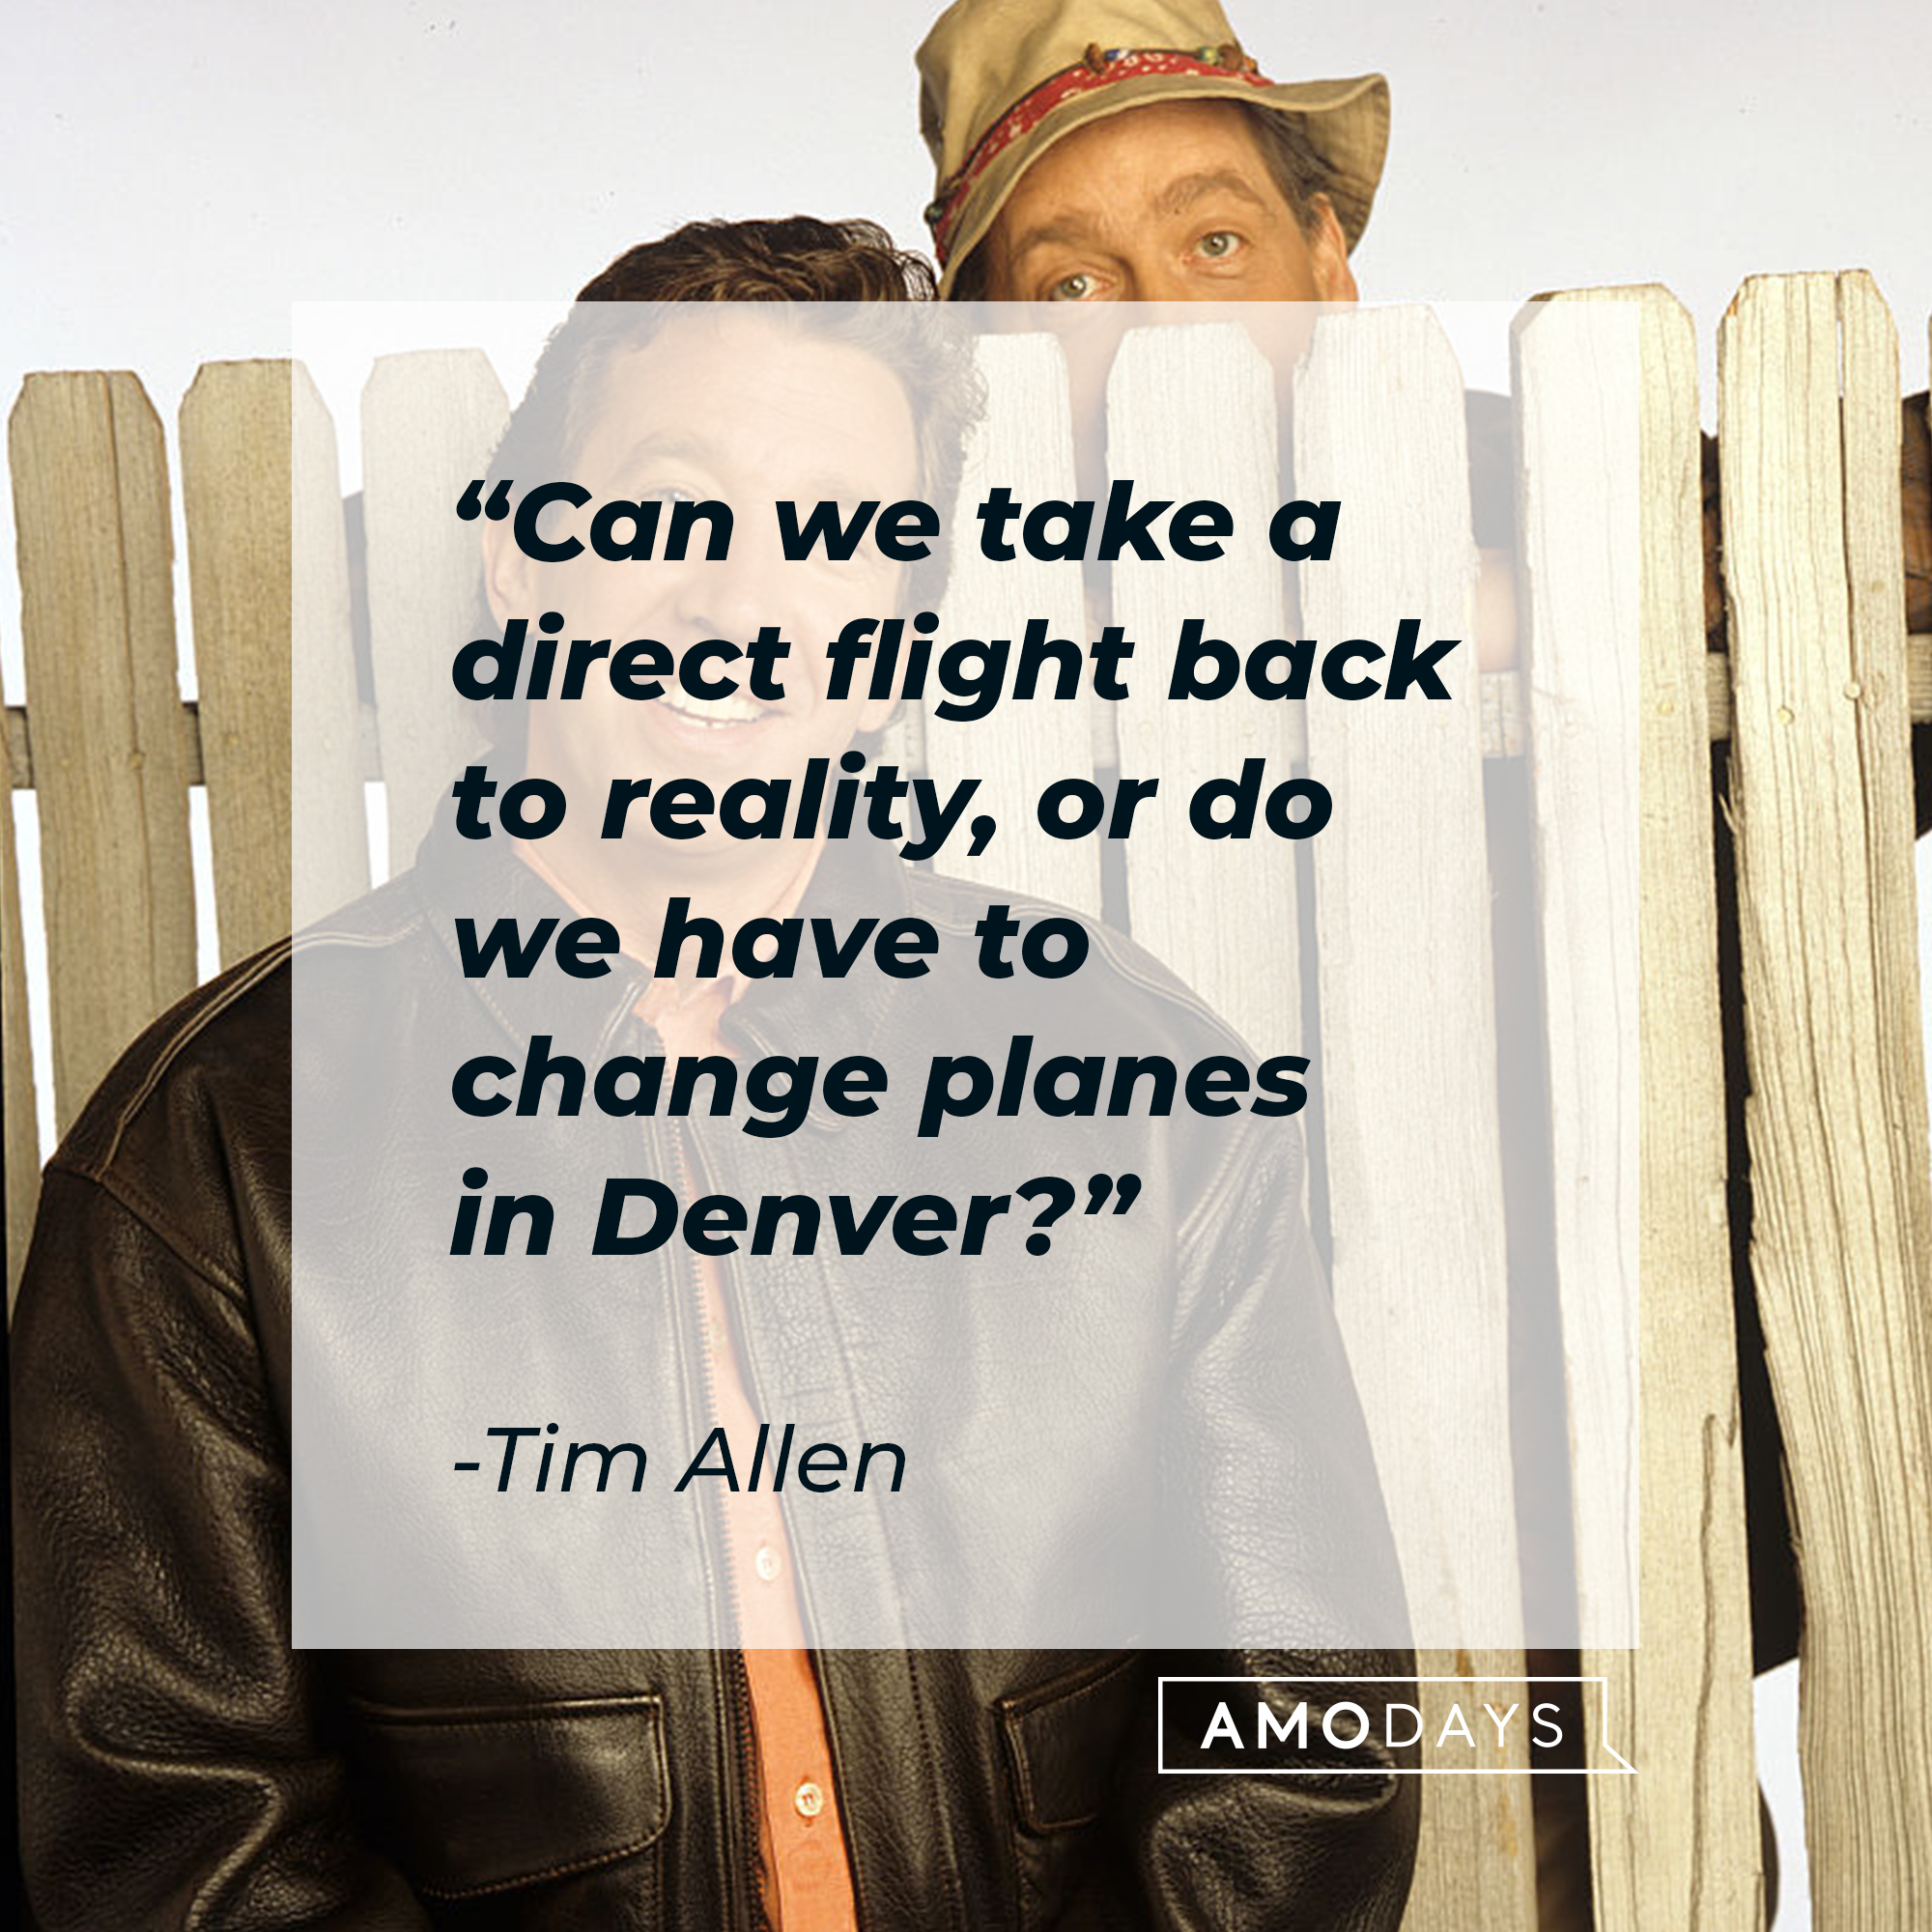 An image of Tim Allen, with his quote: “Can we take a direct flight back to reality, or do we have to change planes in Denver?”┃Source: Getty Images